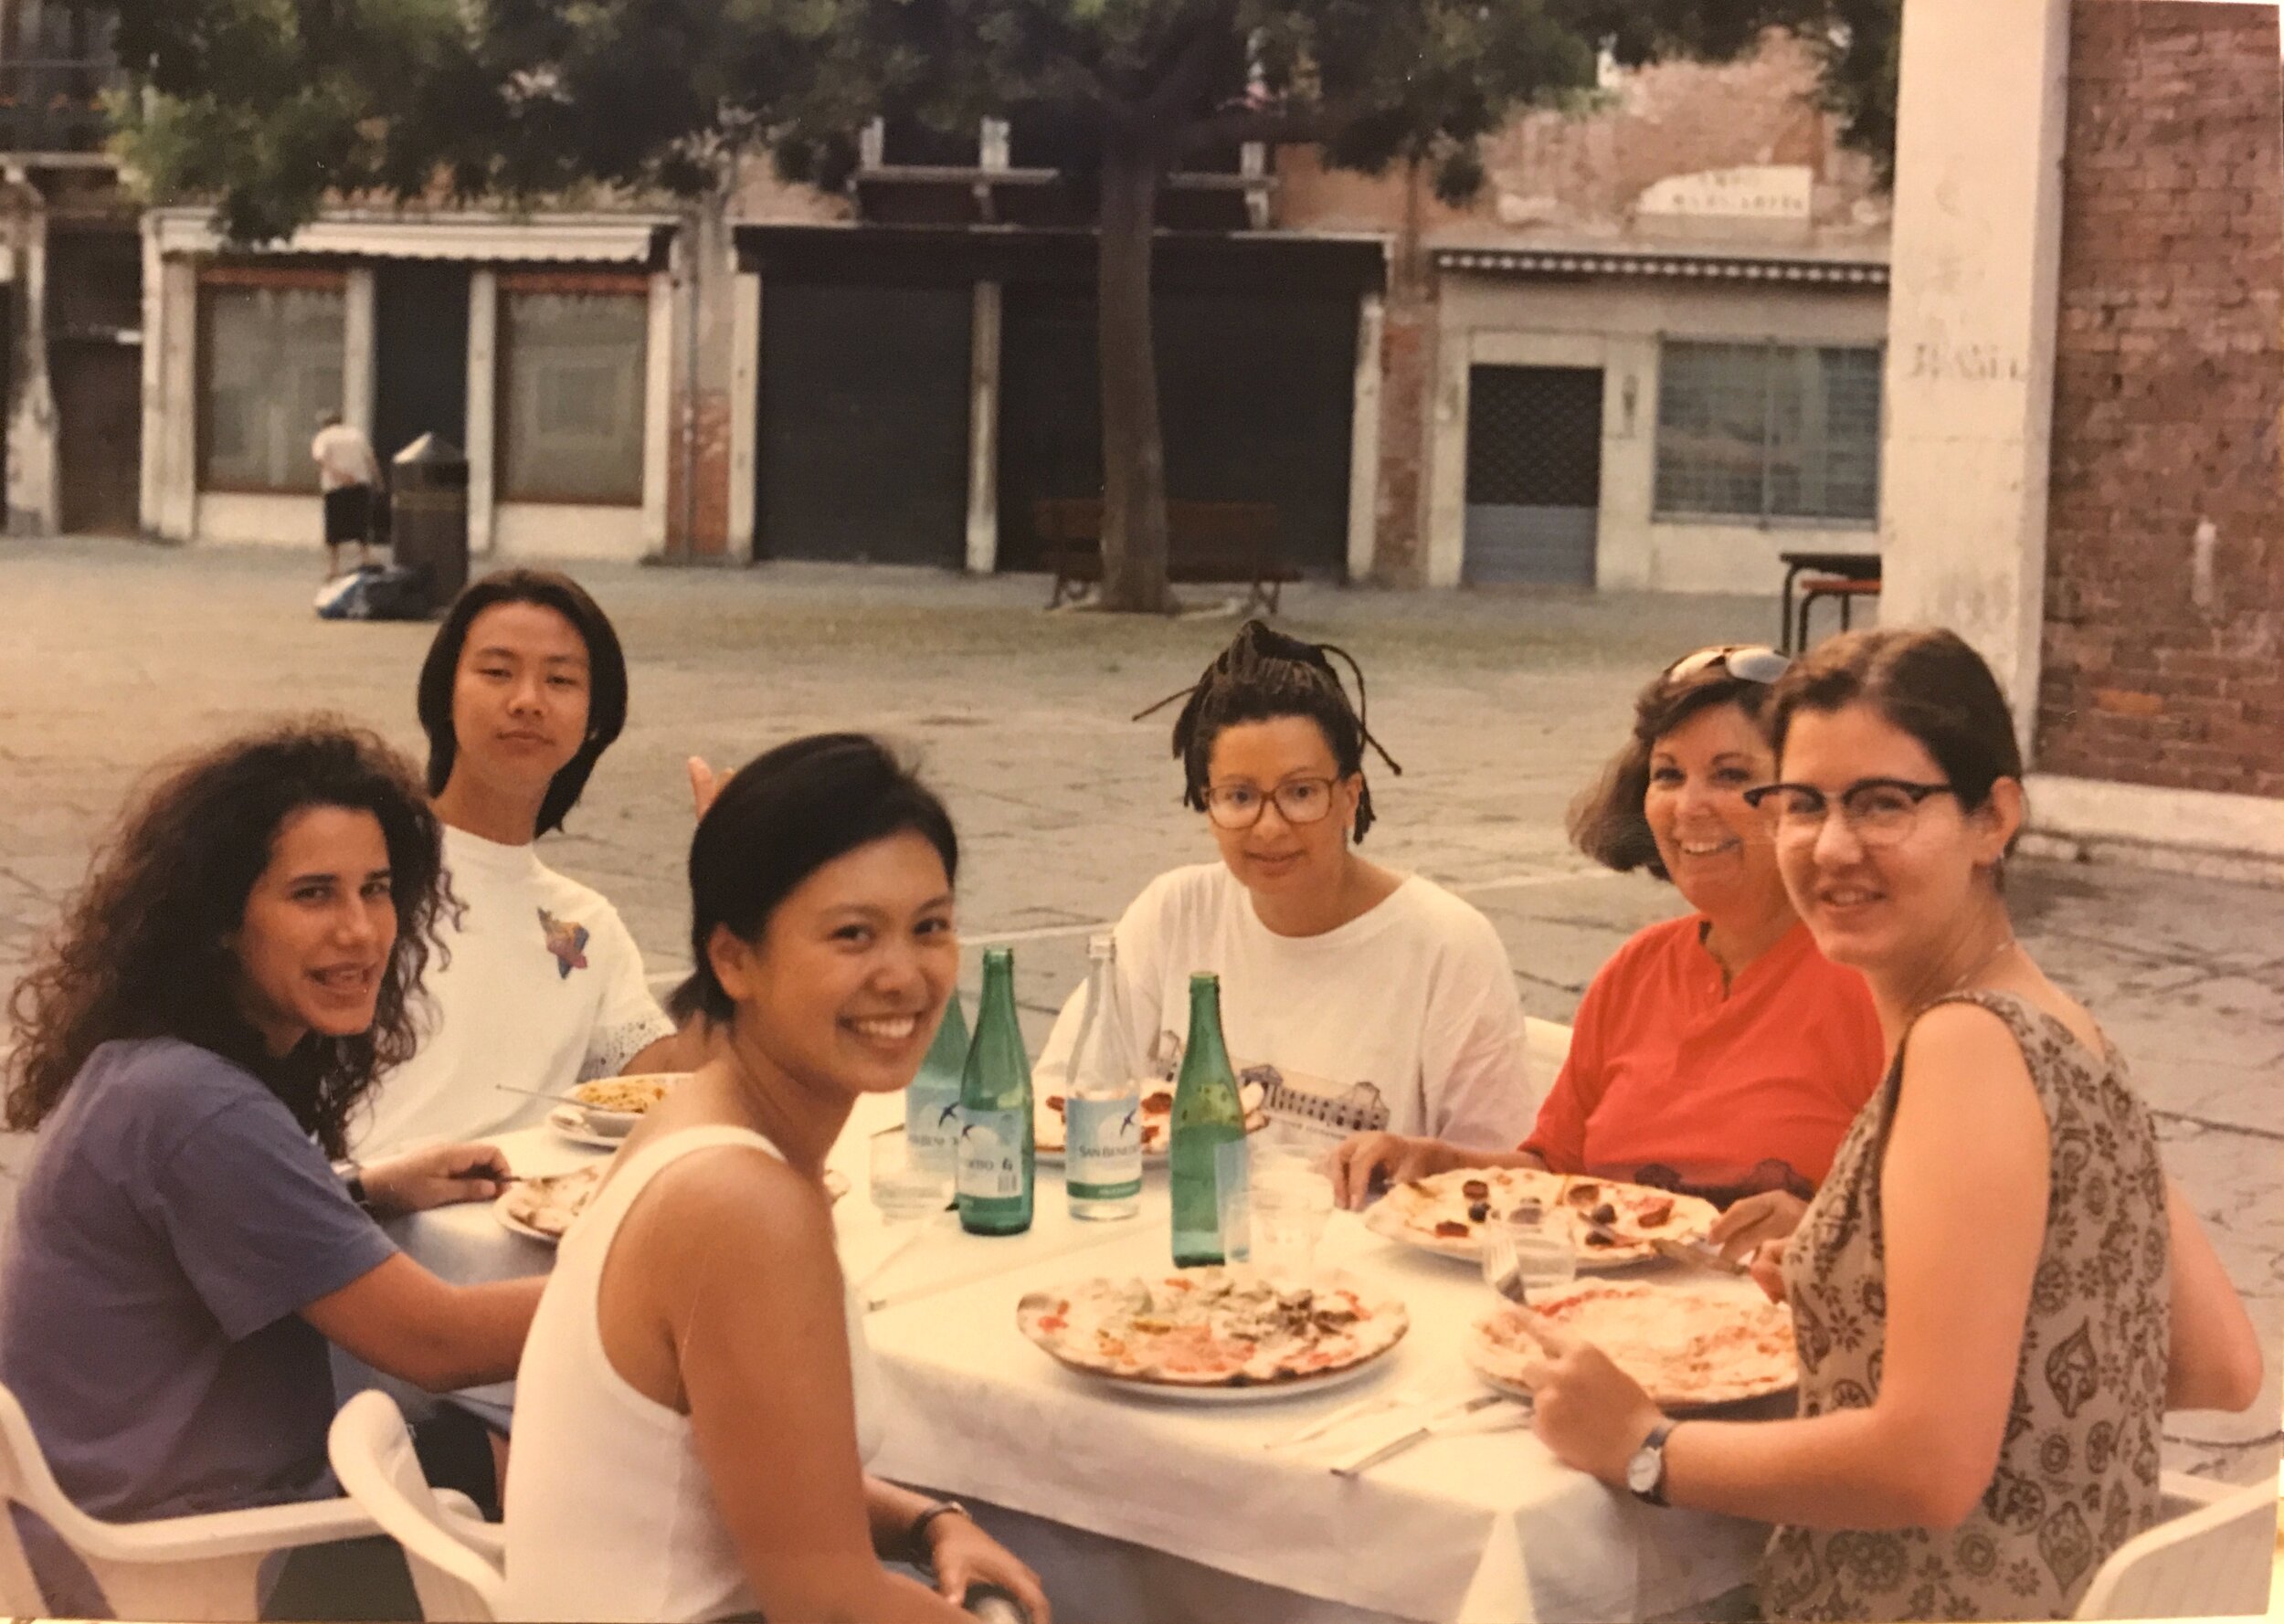   Pizza in the Piazza , Susan Jaramillo, Wennie Huang, and Sunny Spillane in front, 1993 (photo: Wennie Huang) 